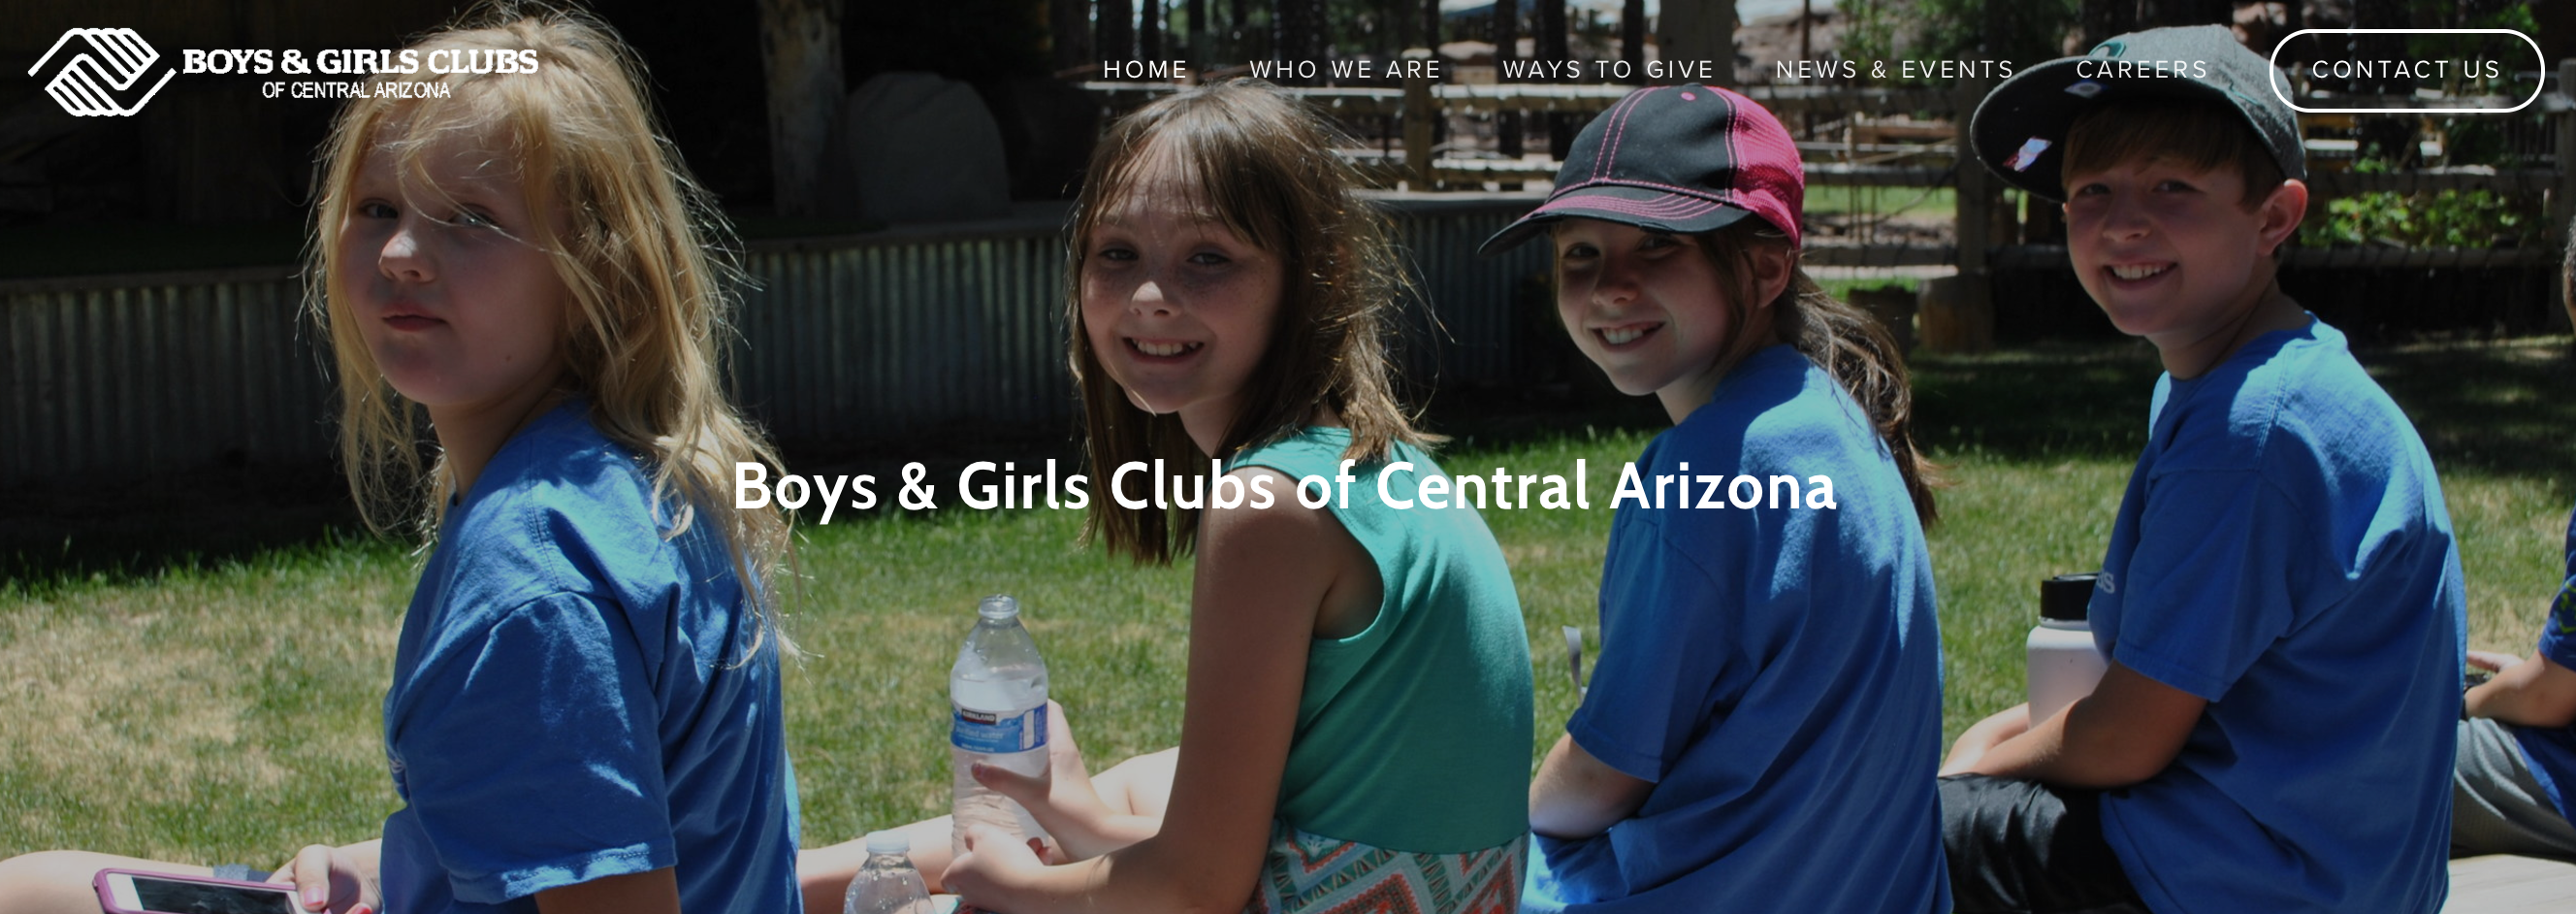 Let’s Bust $100,000 for the Boys and Girls Club of Central AZ